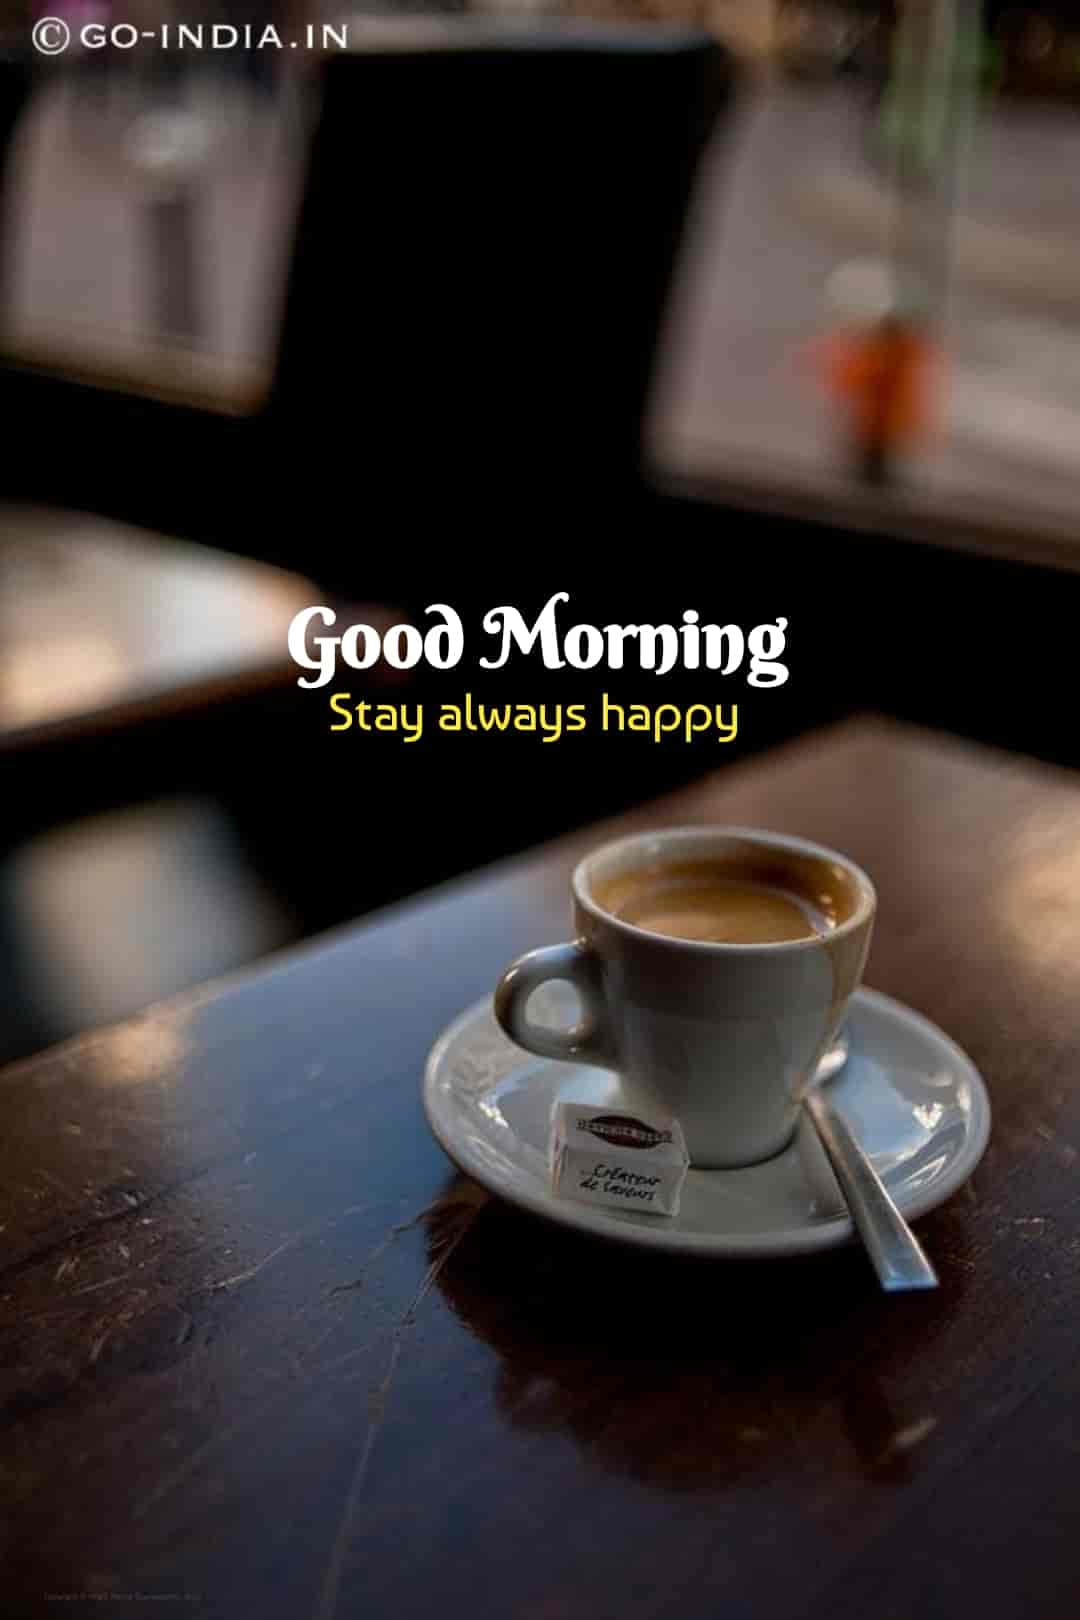 100+ Lovely Good Morning Coffee Images [ Latest Collection ]